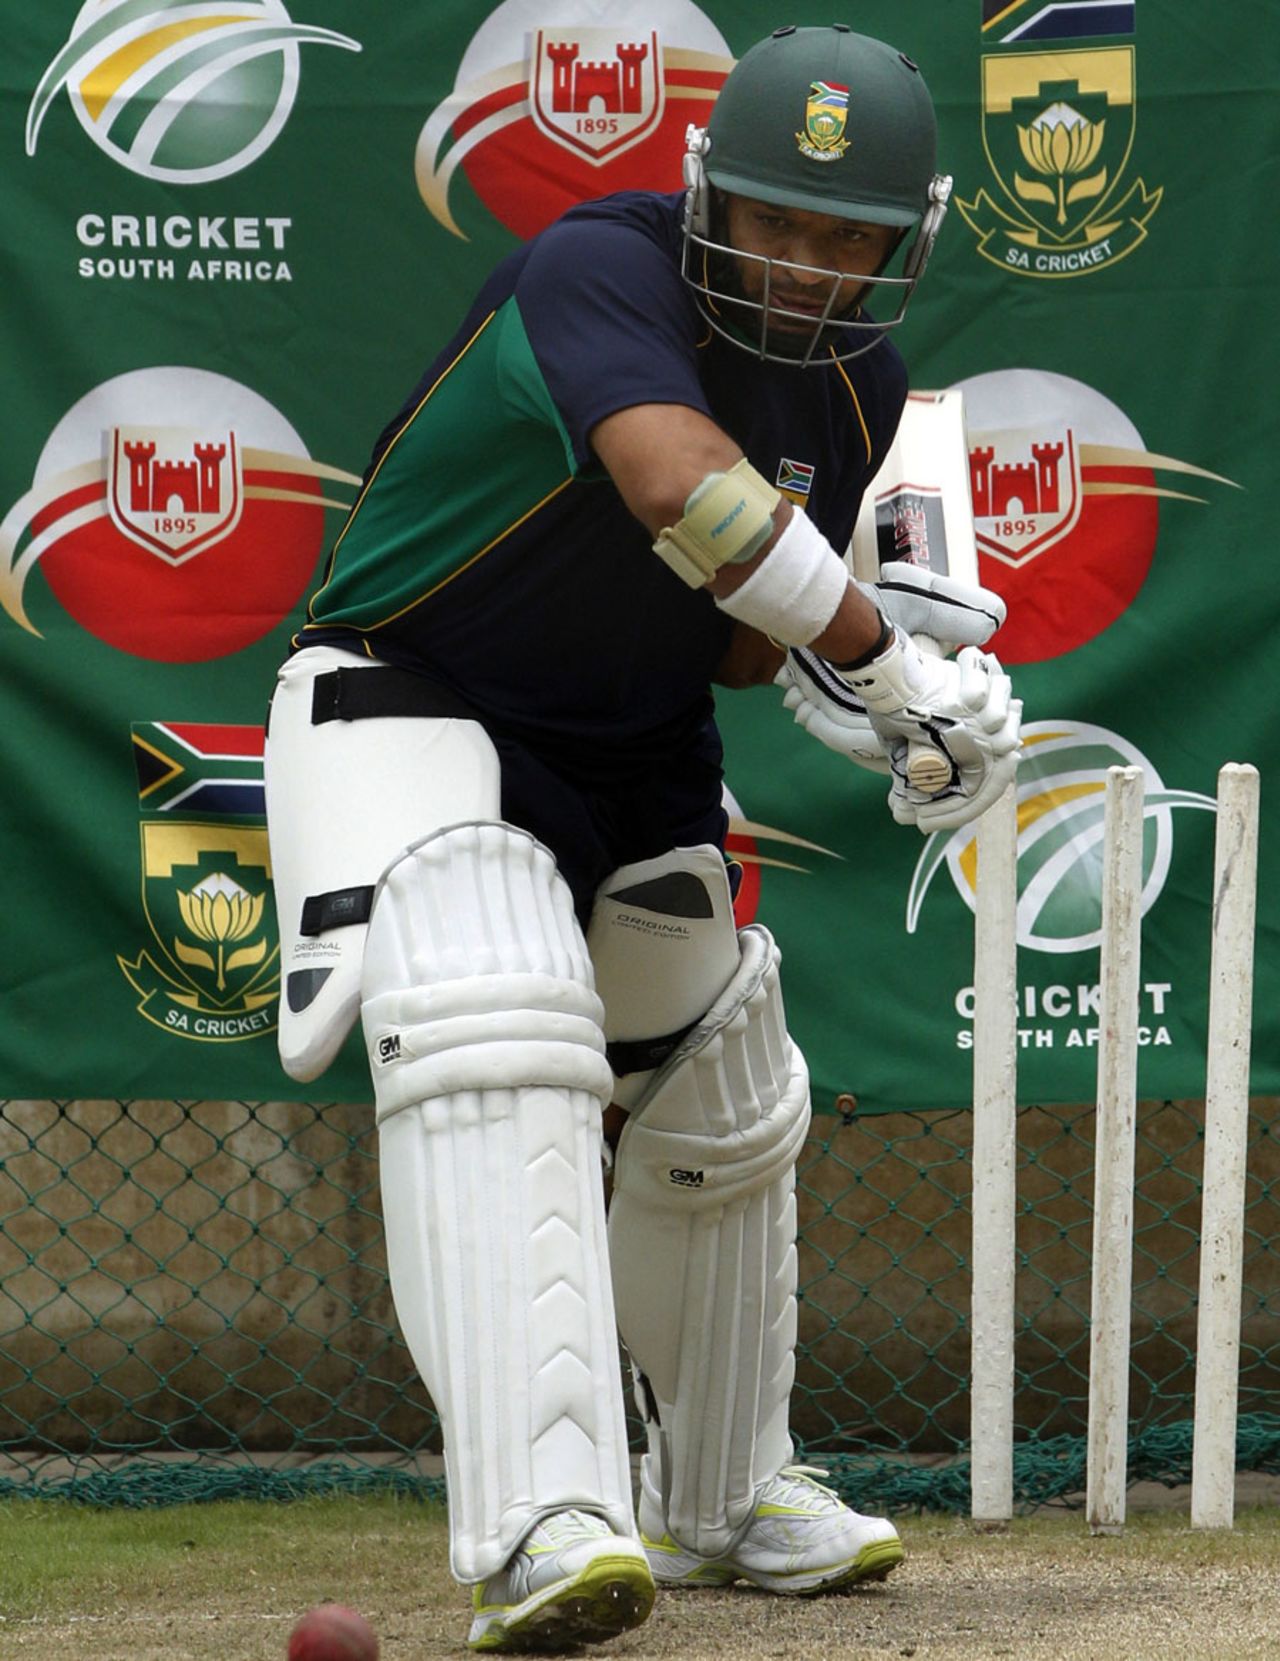 Ashwell Prince practises in the nets on the eve of the first Test between South Africa and India, Centurion, December 15, 2010